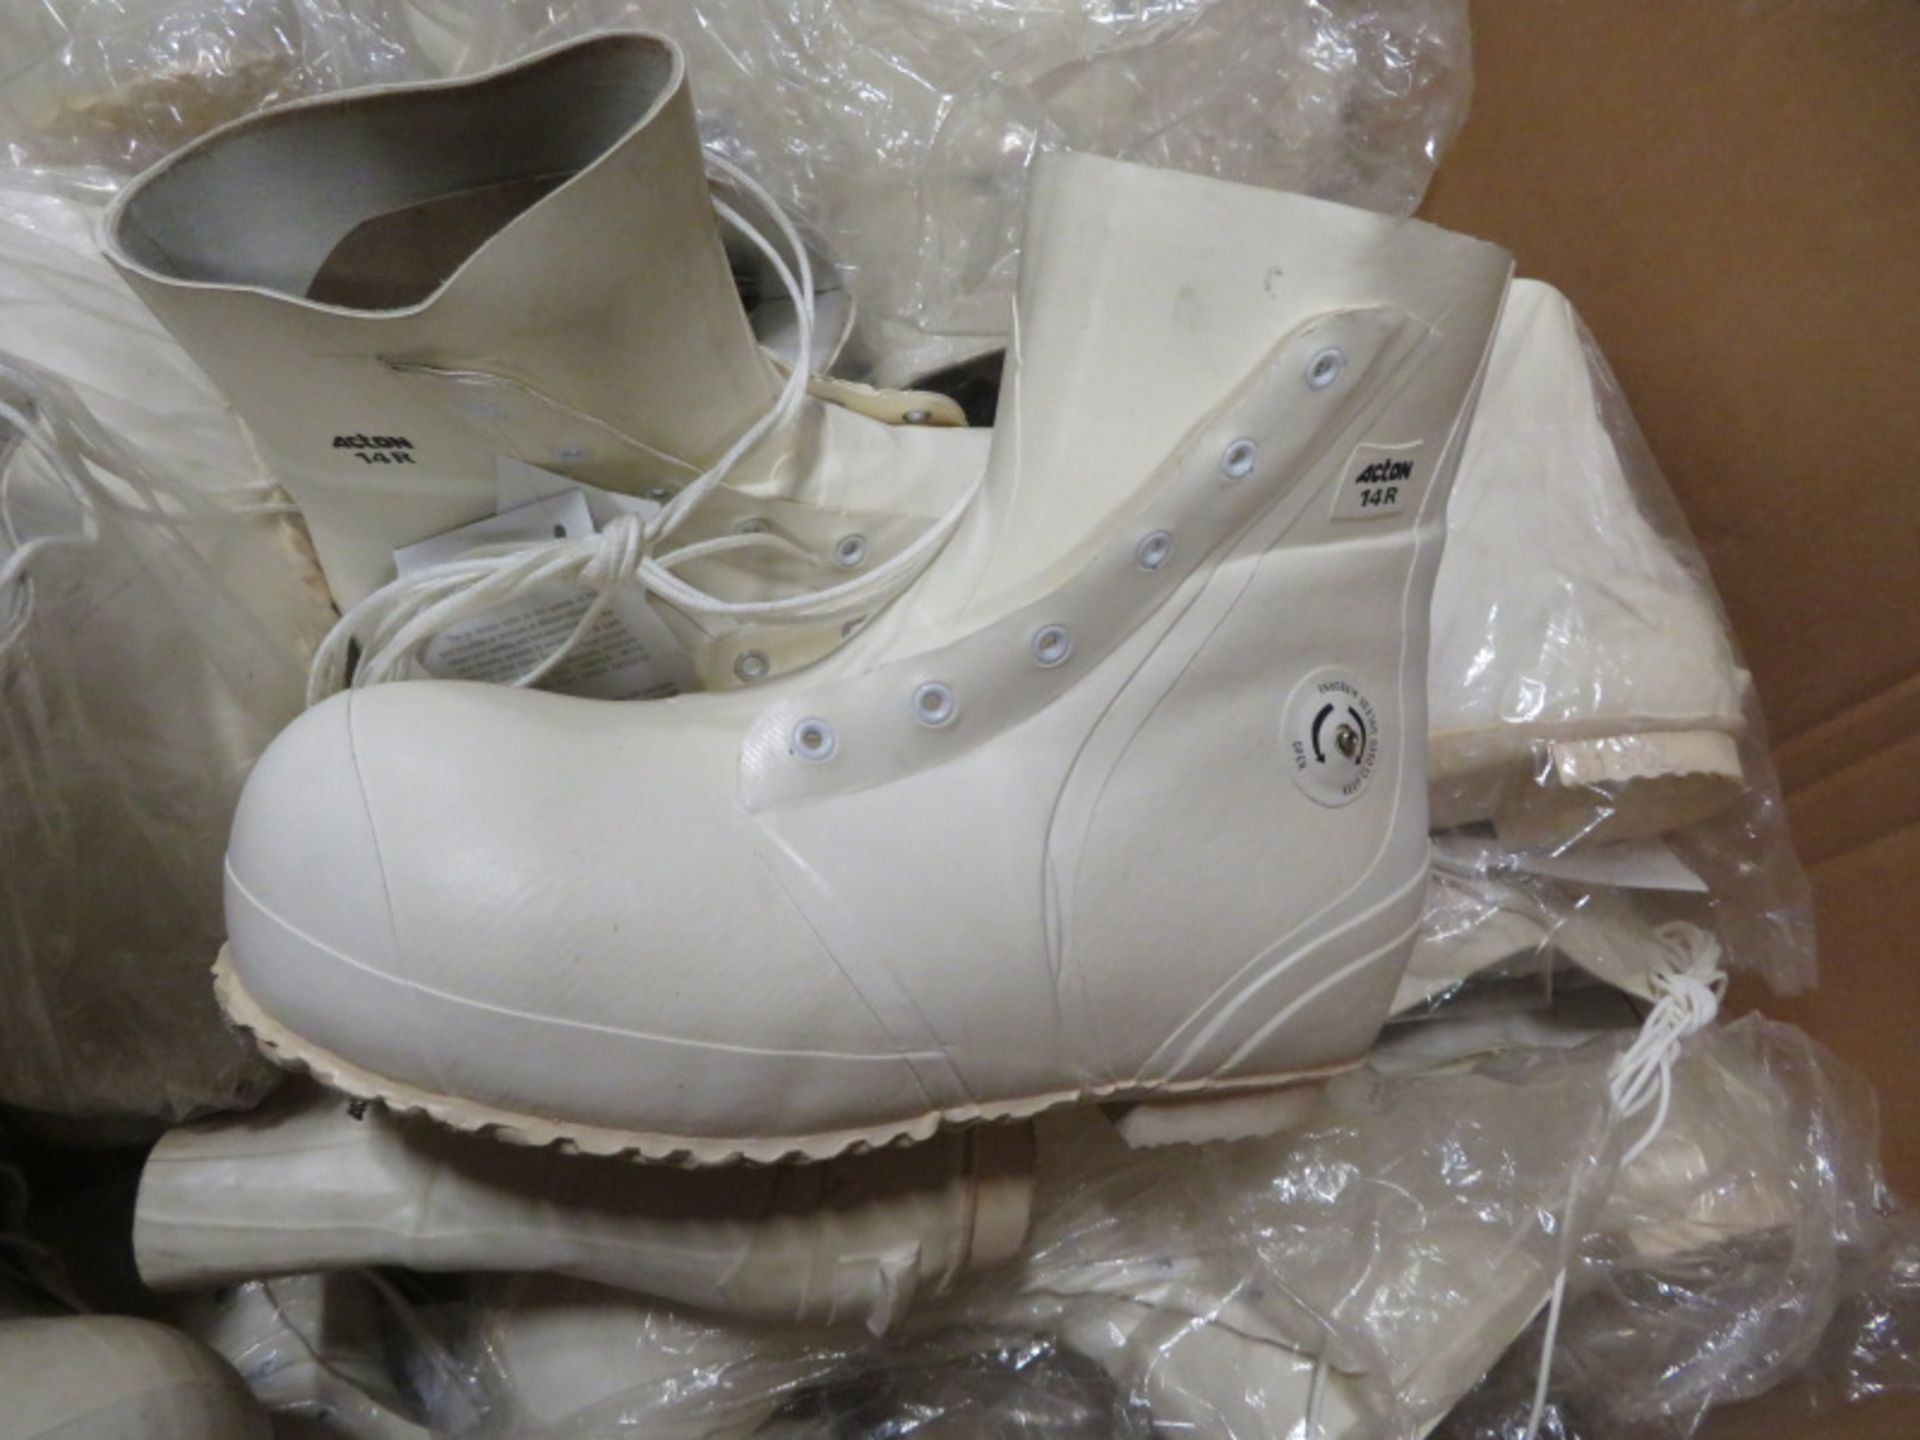 20x Pairs of White Insulated Extreme Cold Boots - Size 14R - Image 3 of 5